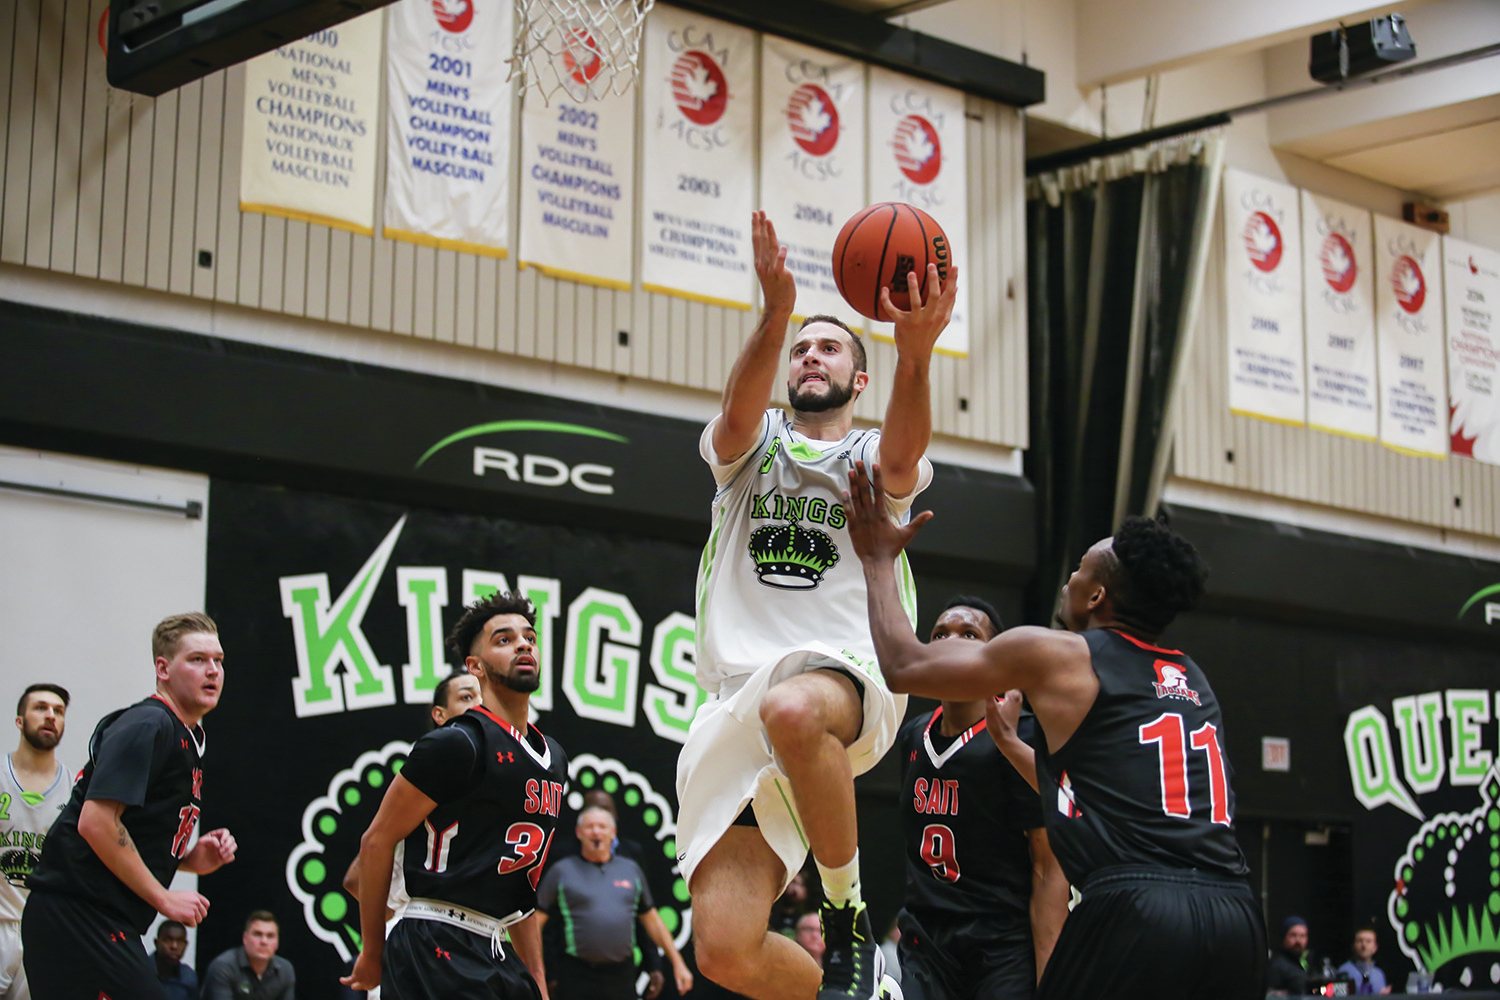 JUMPER - Shayne Stumpf of the Red Deer College Kings Basketball team drove to the net for a layup during a game against the SAIT Trojans at RDC last Saturday. The Trojans won the game by a score of 91-87.